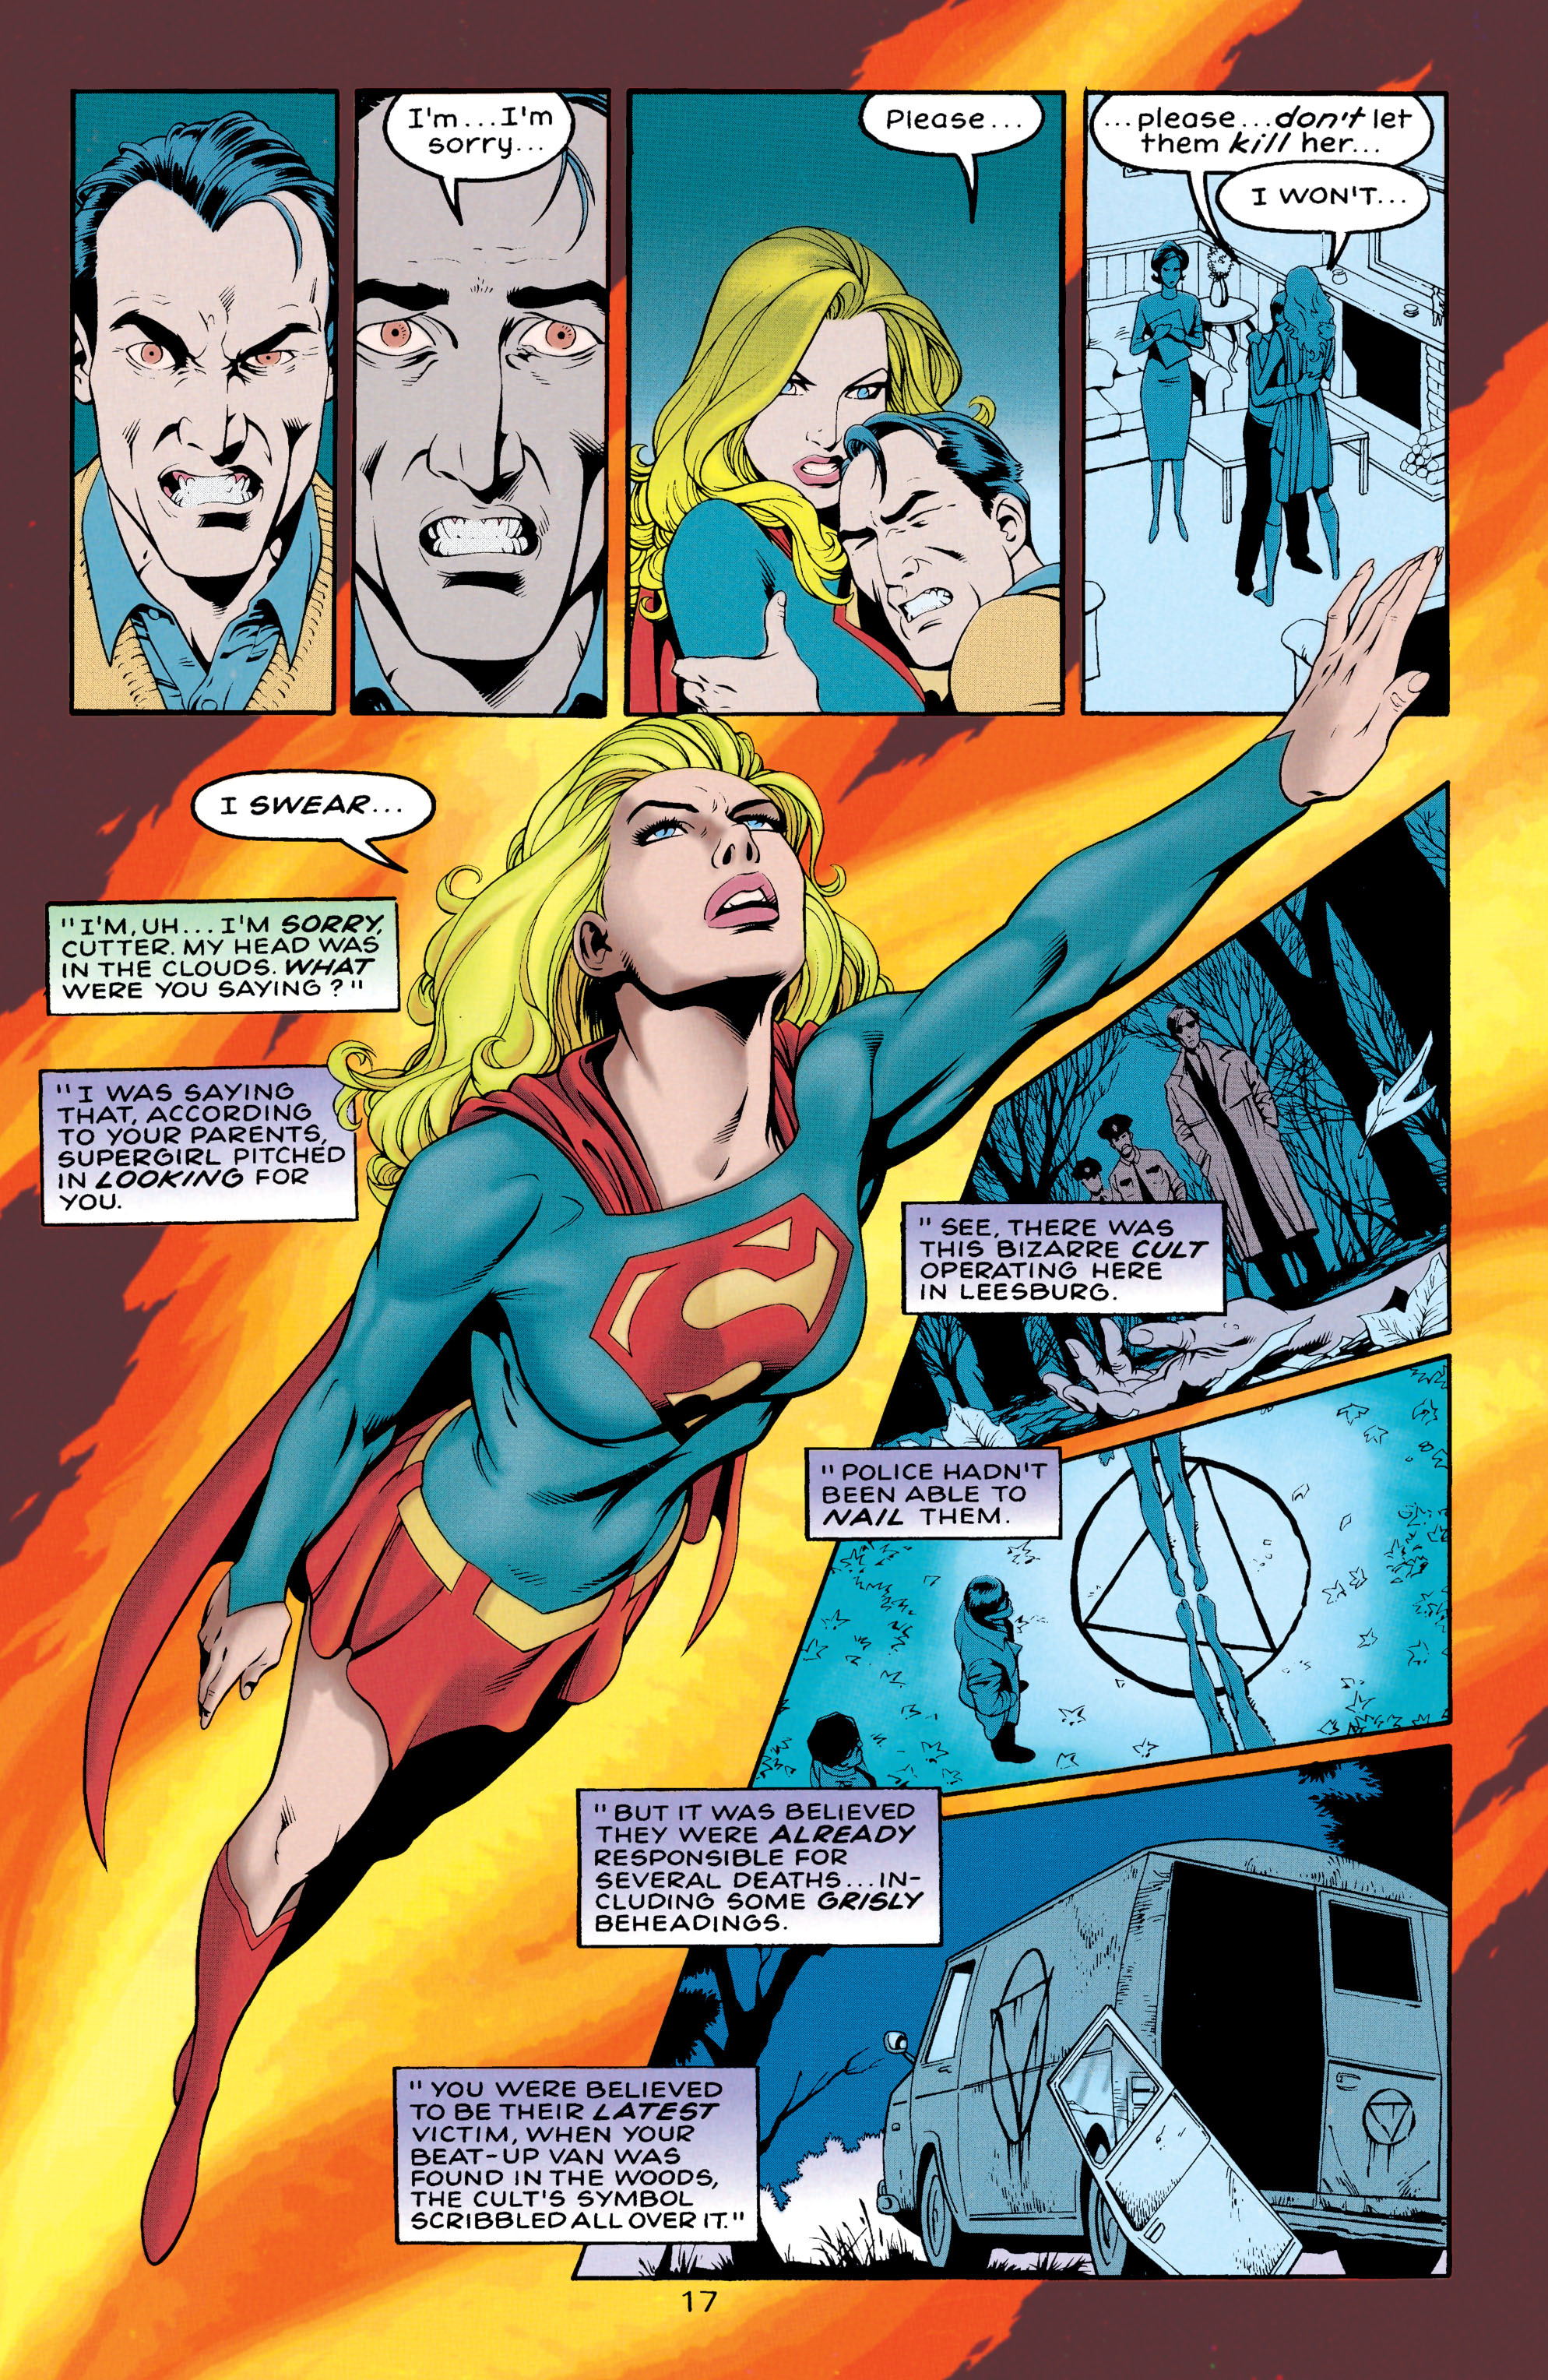 Supergirl (1996) 1 Page 17